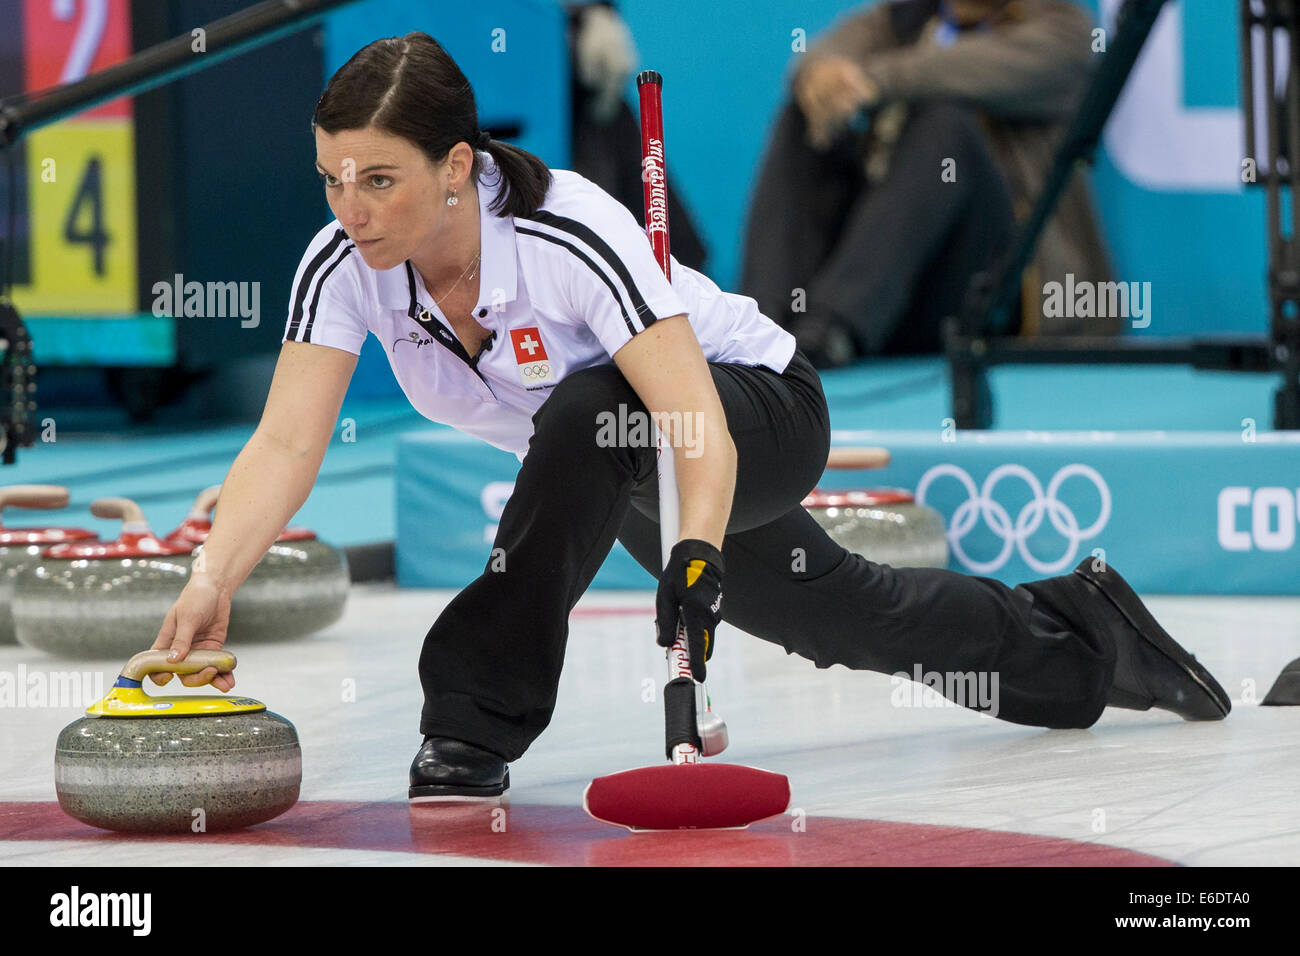 Team Swiss, Carmen Kueng  plays a stone during  Women's curling competition at the Olympic Winter Games, Sochi 2014 Stock Photo